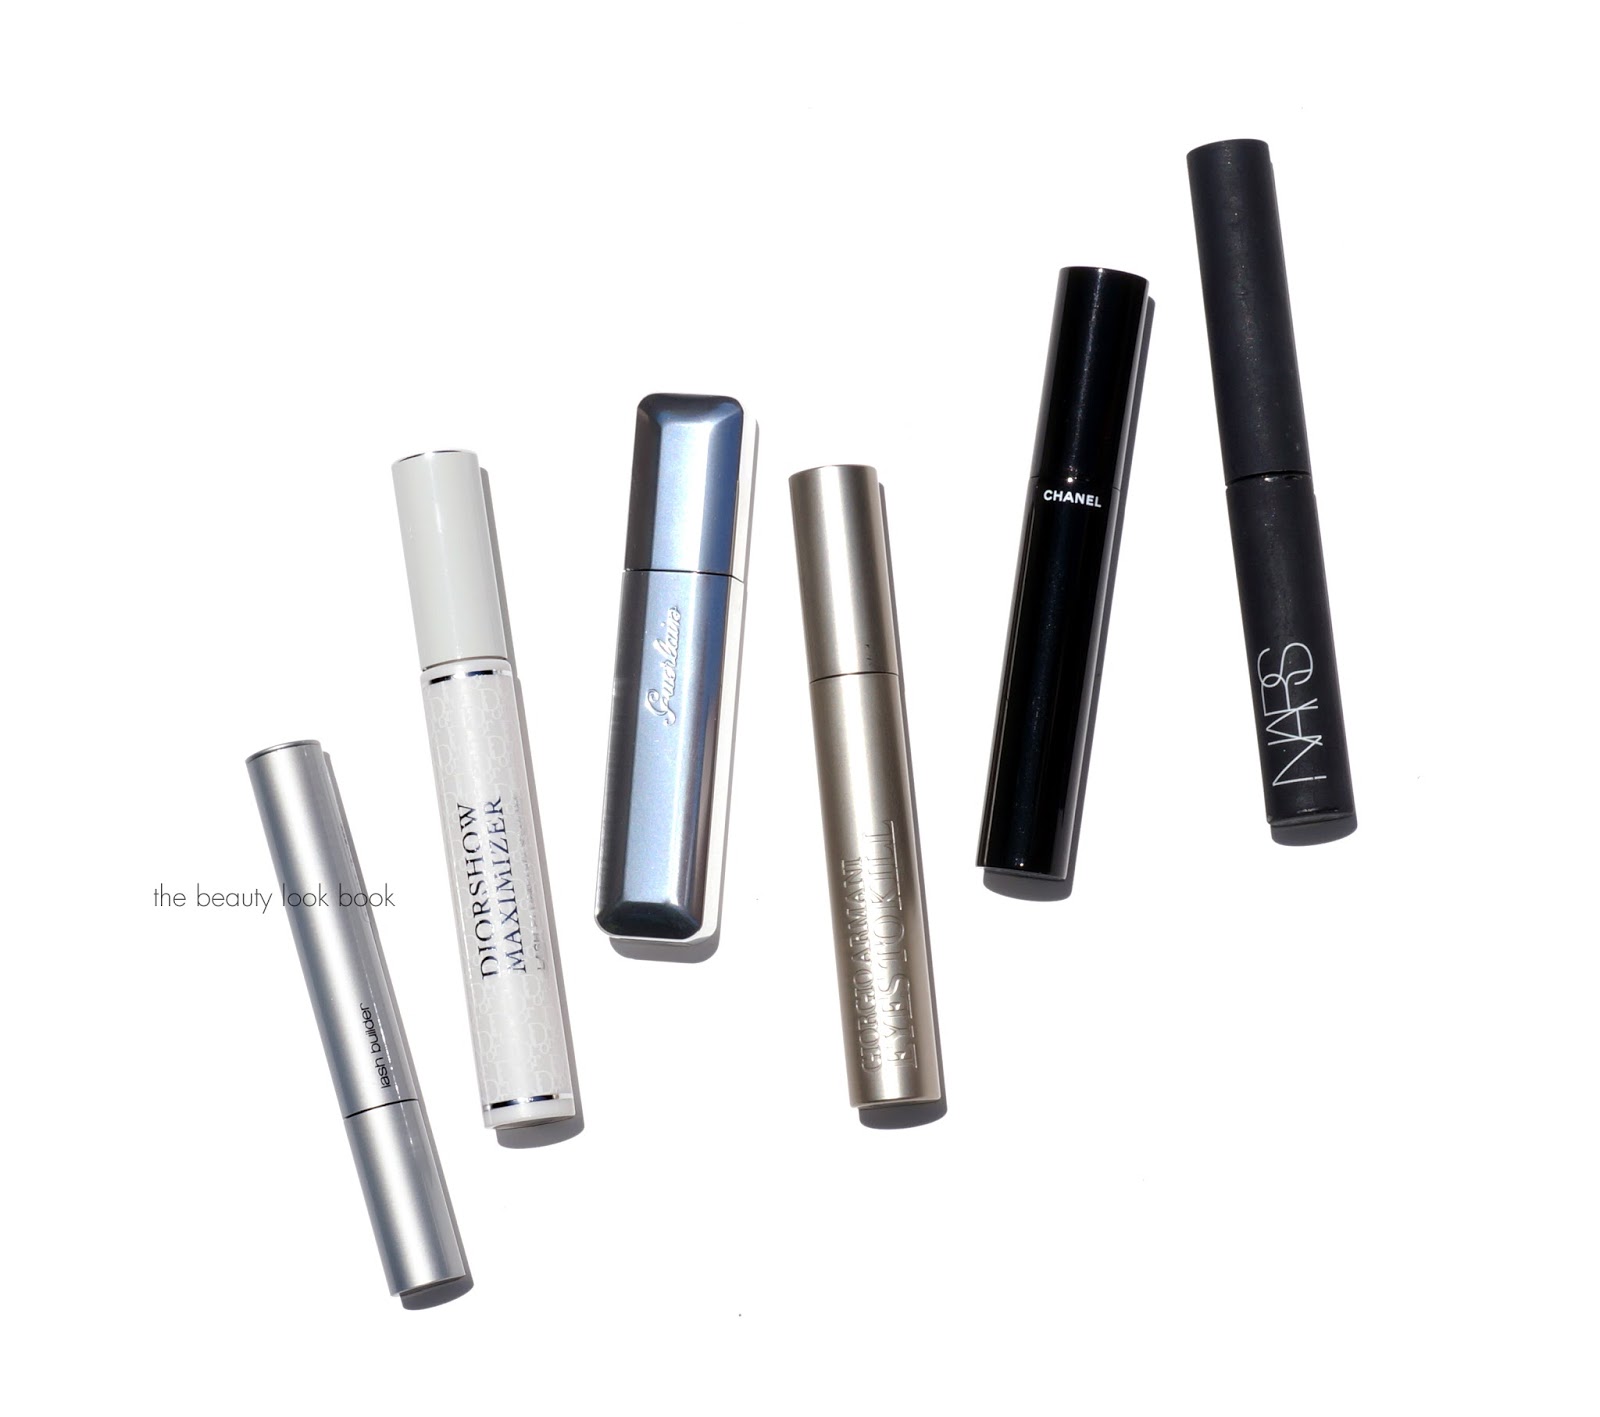 In Rotation  Beauty Look Book Mascara and Lash Primer Picks - The